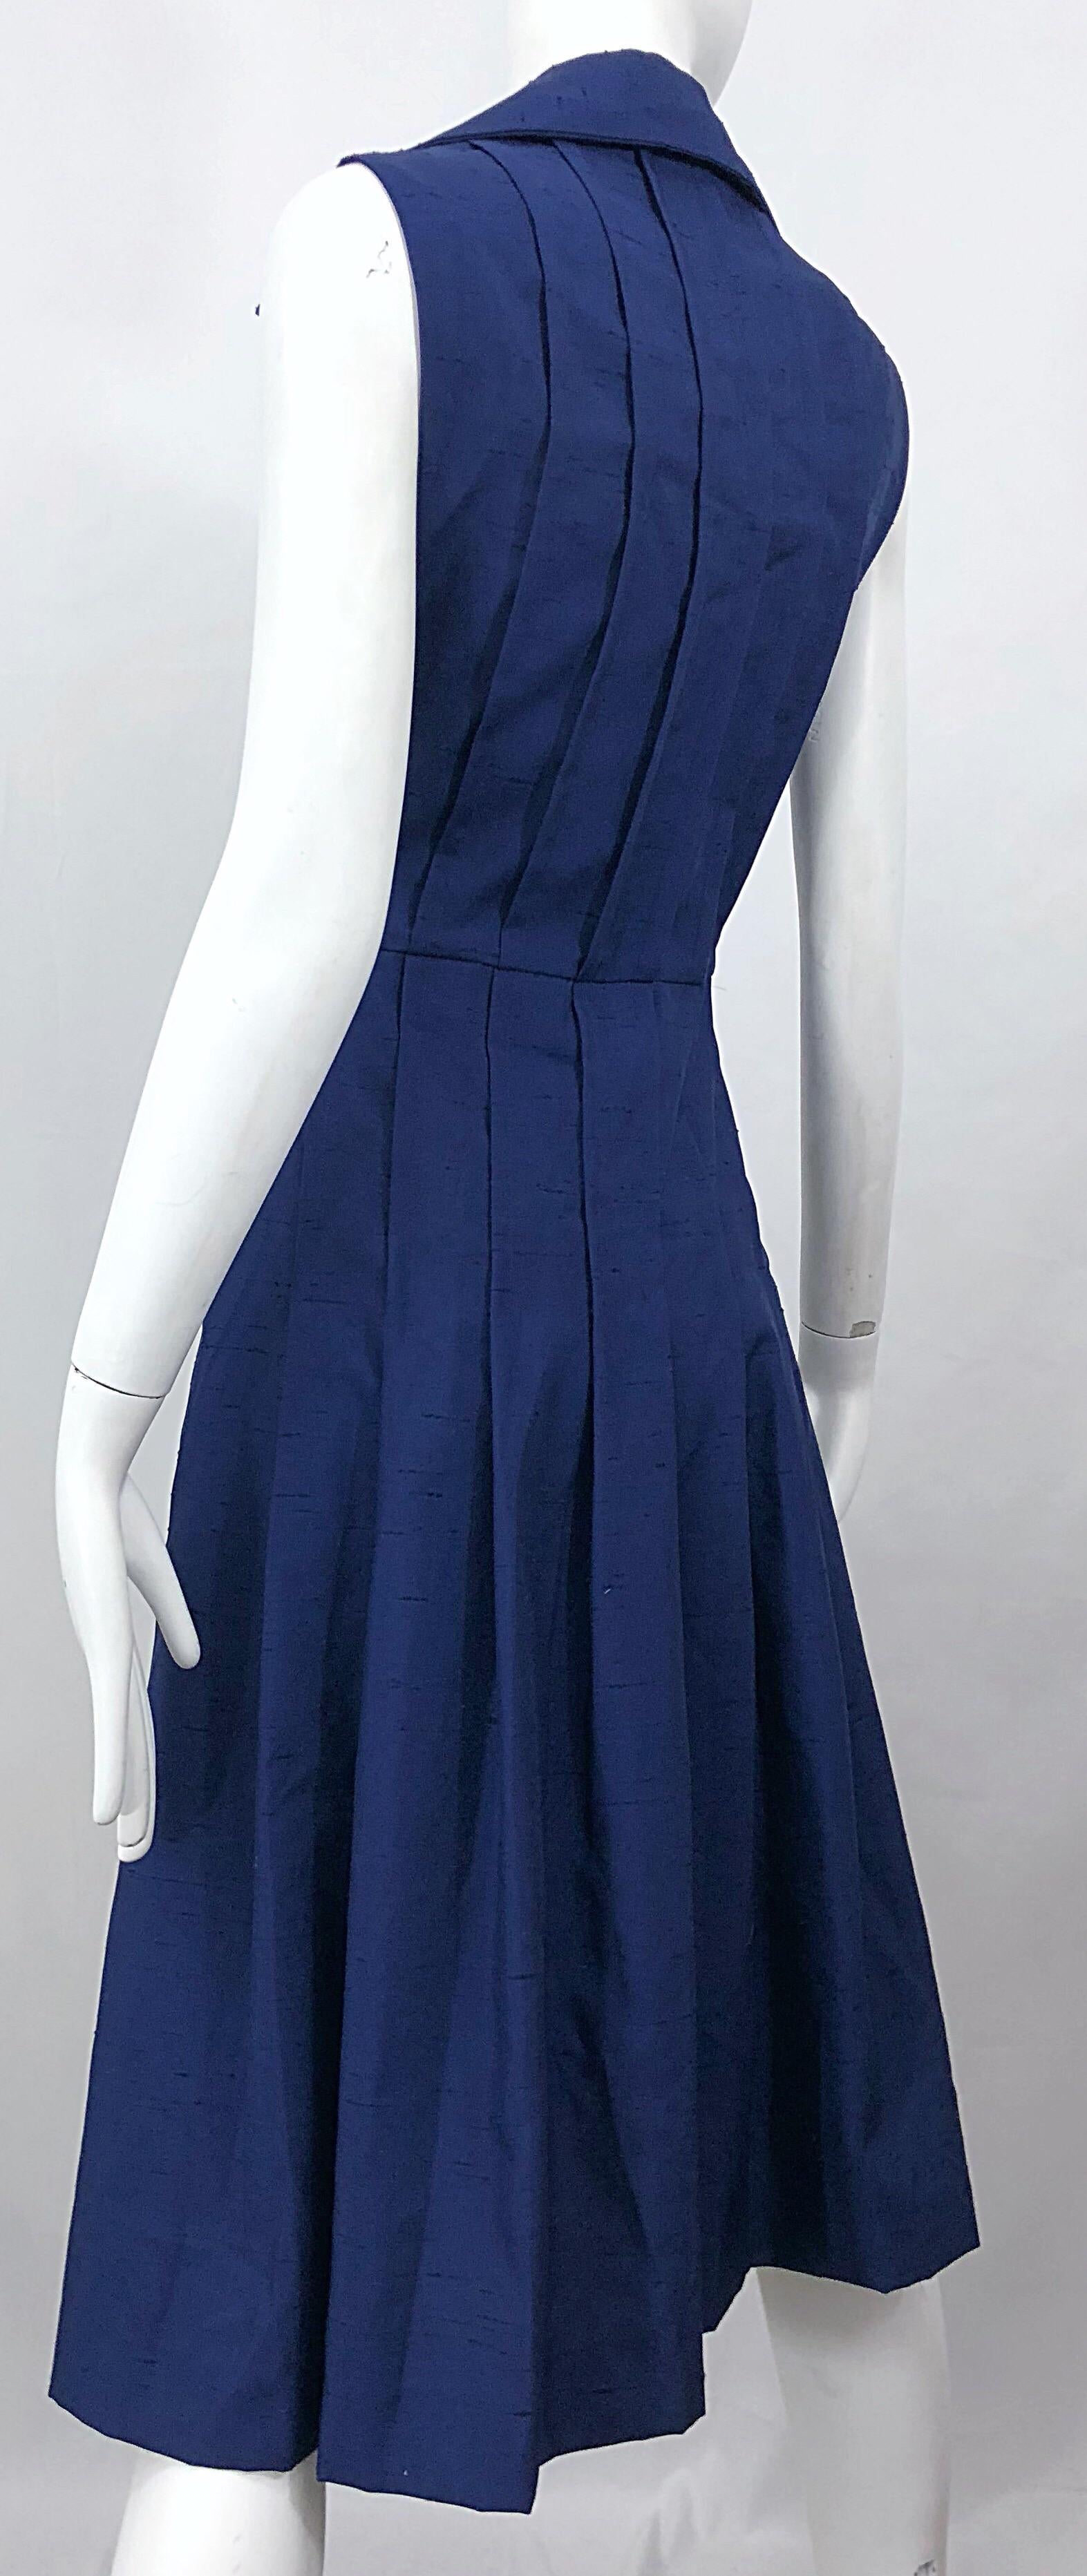 1990s Saks 5th Avenue Sz 8 10 Navy Blue Silk Vintage 90s Sleeveless Shirt Dress In Excellent Condition For Sale In San Diego, CA